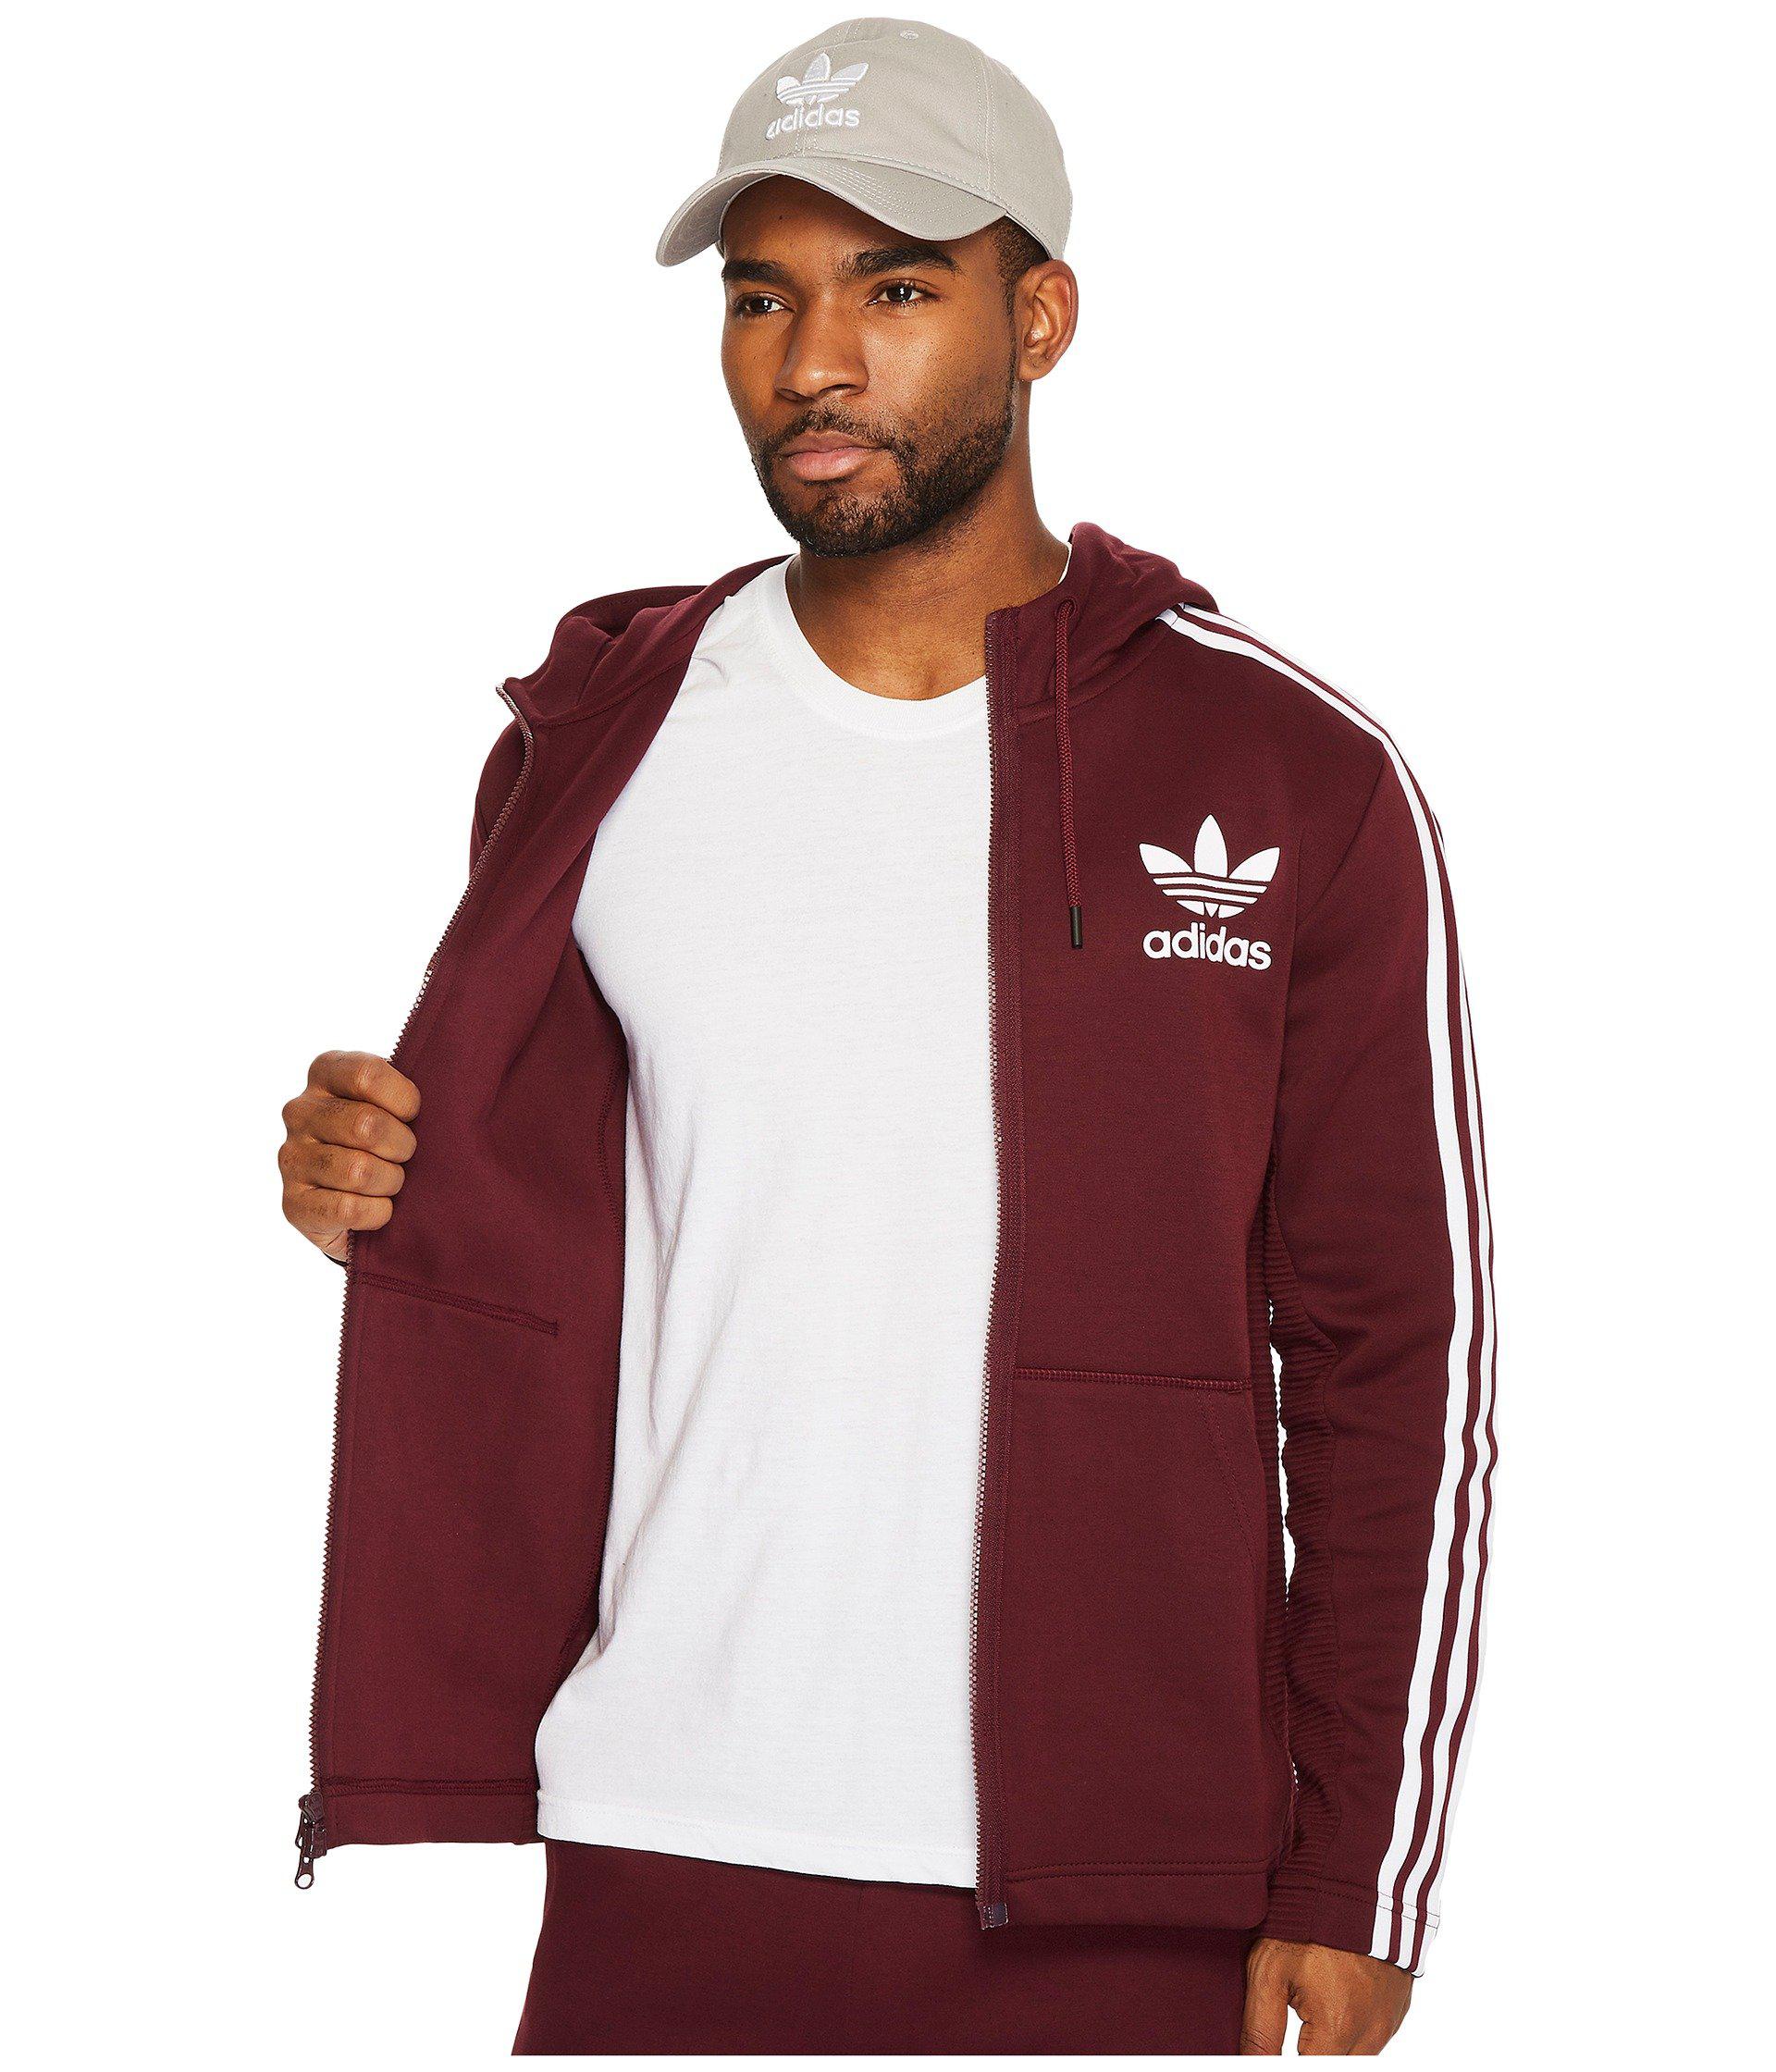 adidas Originals Cotton Curated Full Zip in Maroon (Red) for Men - Lyst